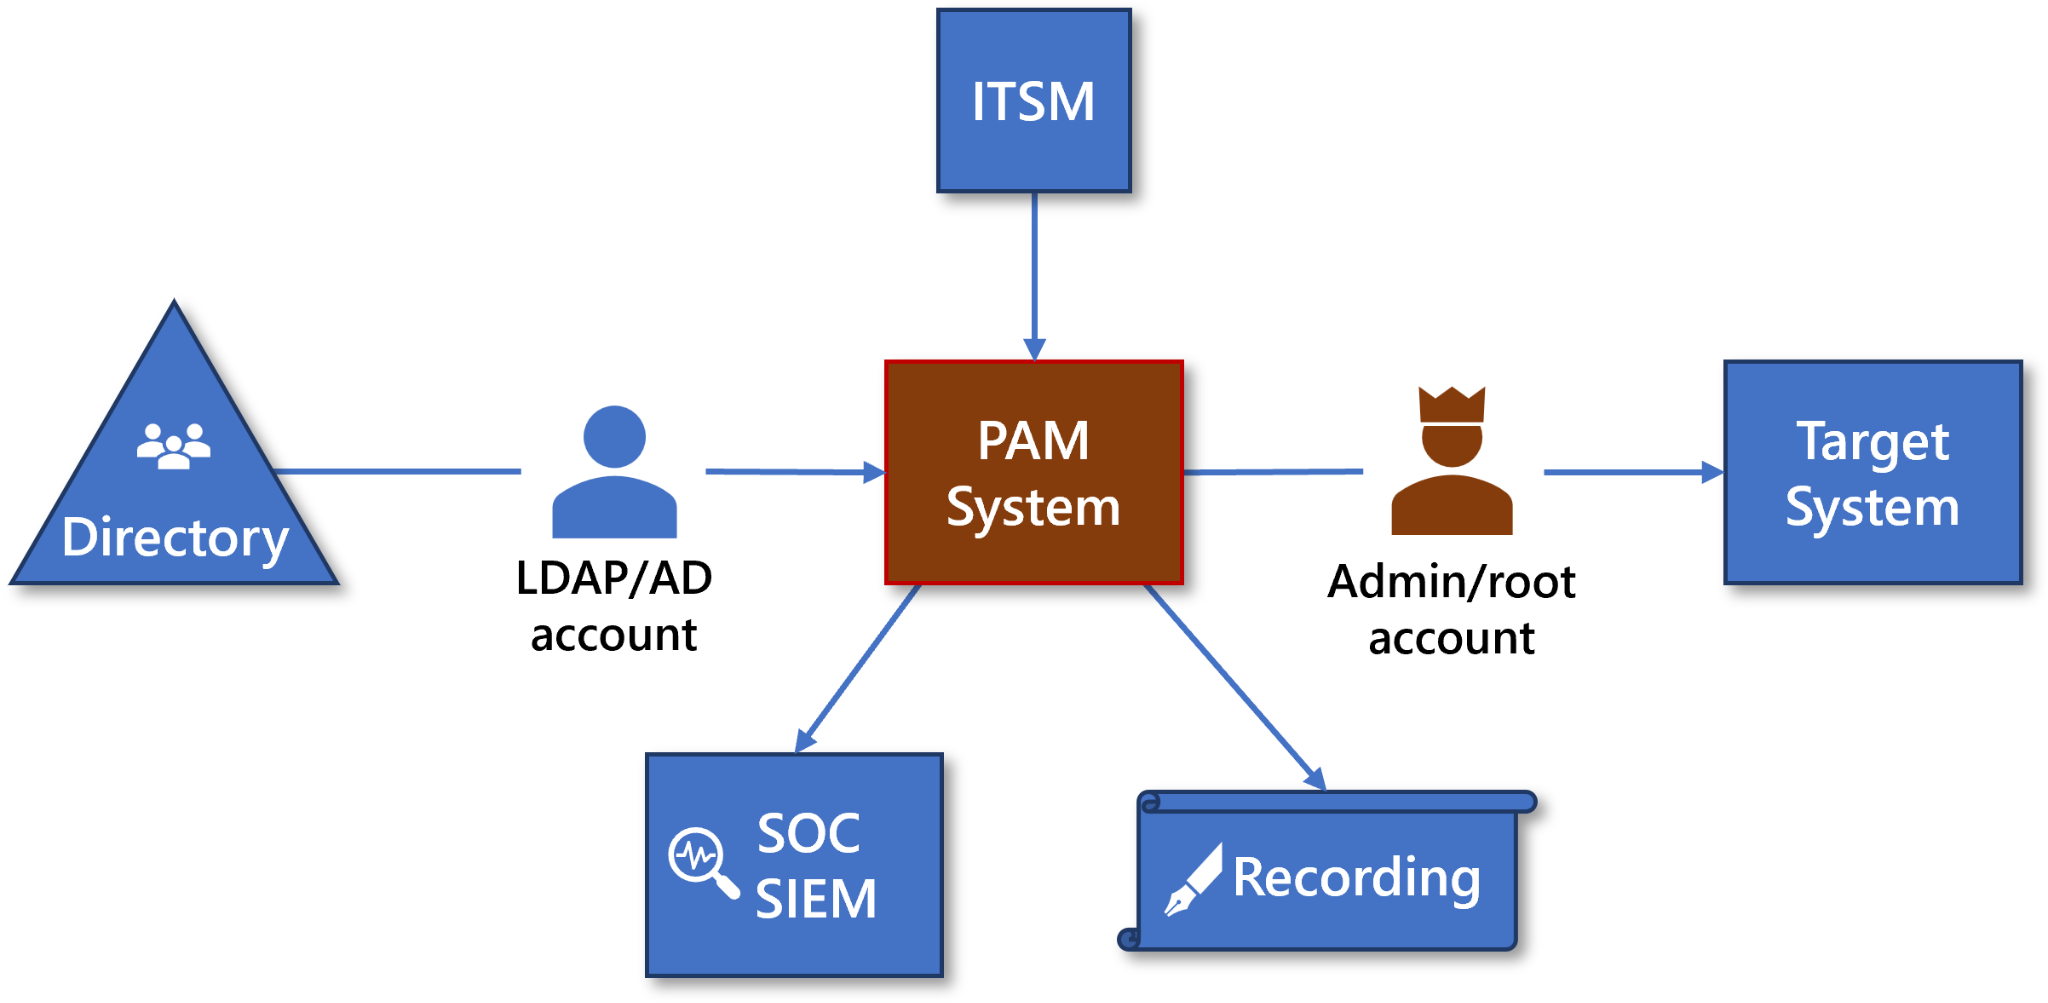 A diagram showing a PAM system at the center of an architecture that includes ITSM, Directory, SOC/SIEM, Recording, and Target System. 